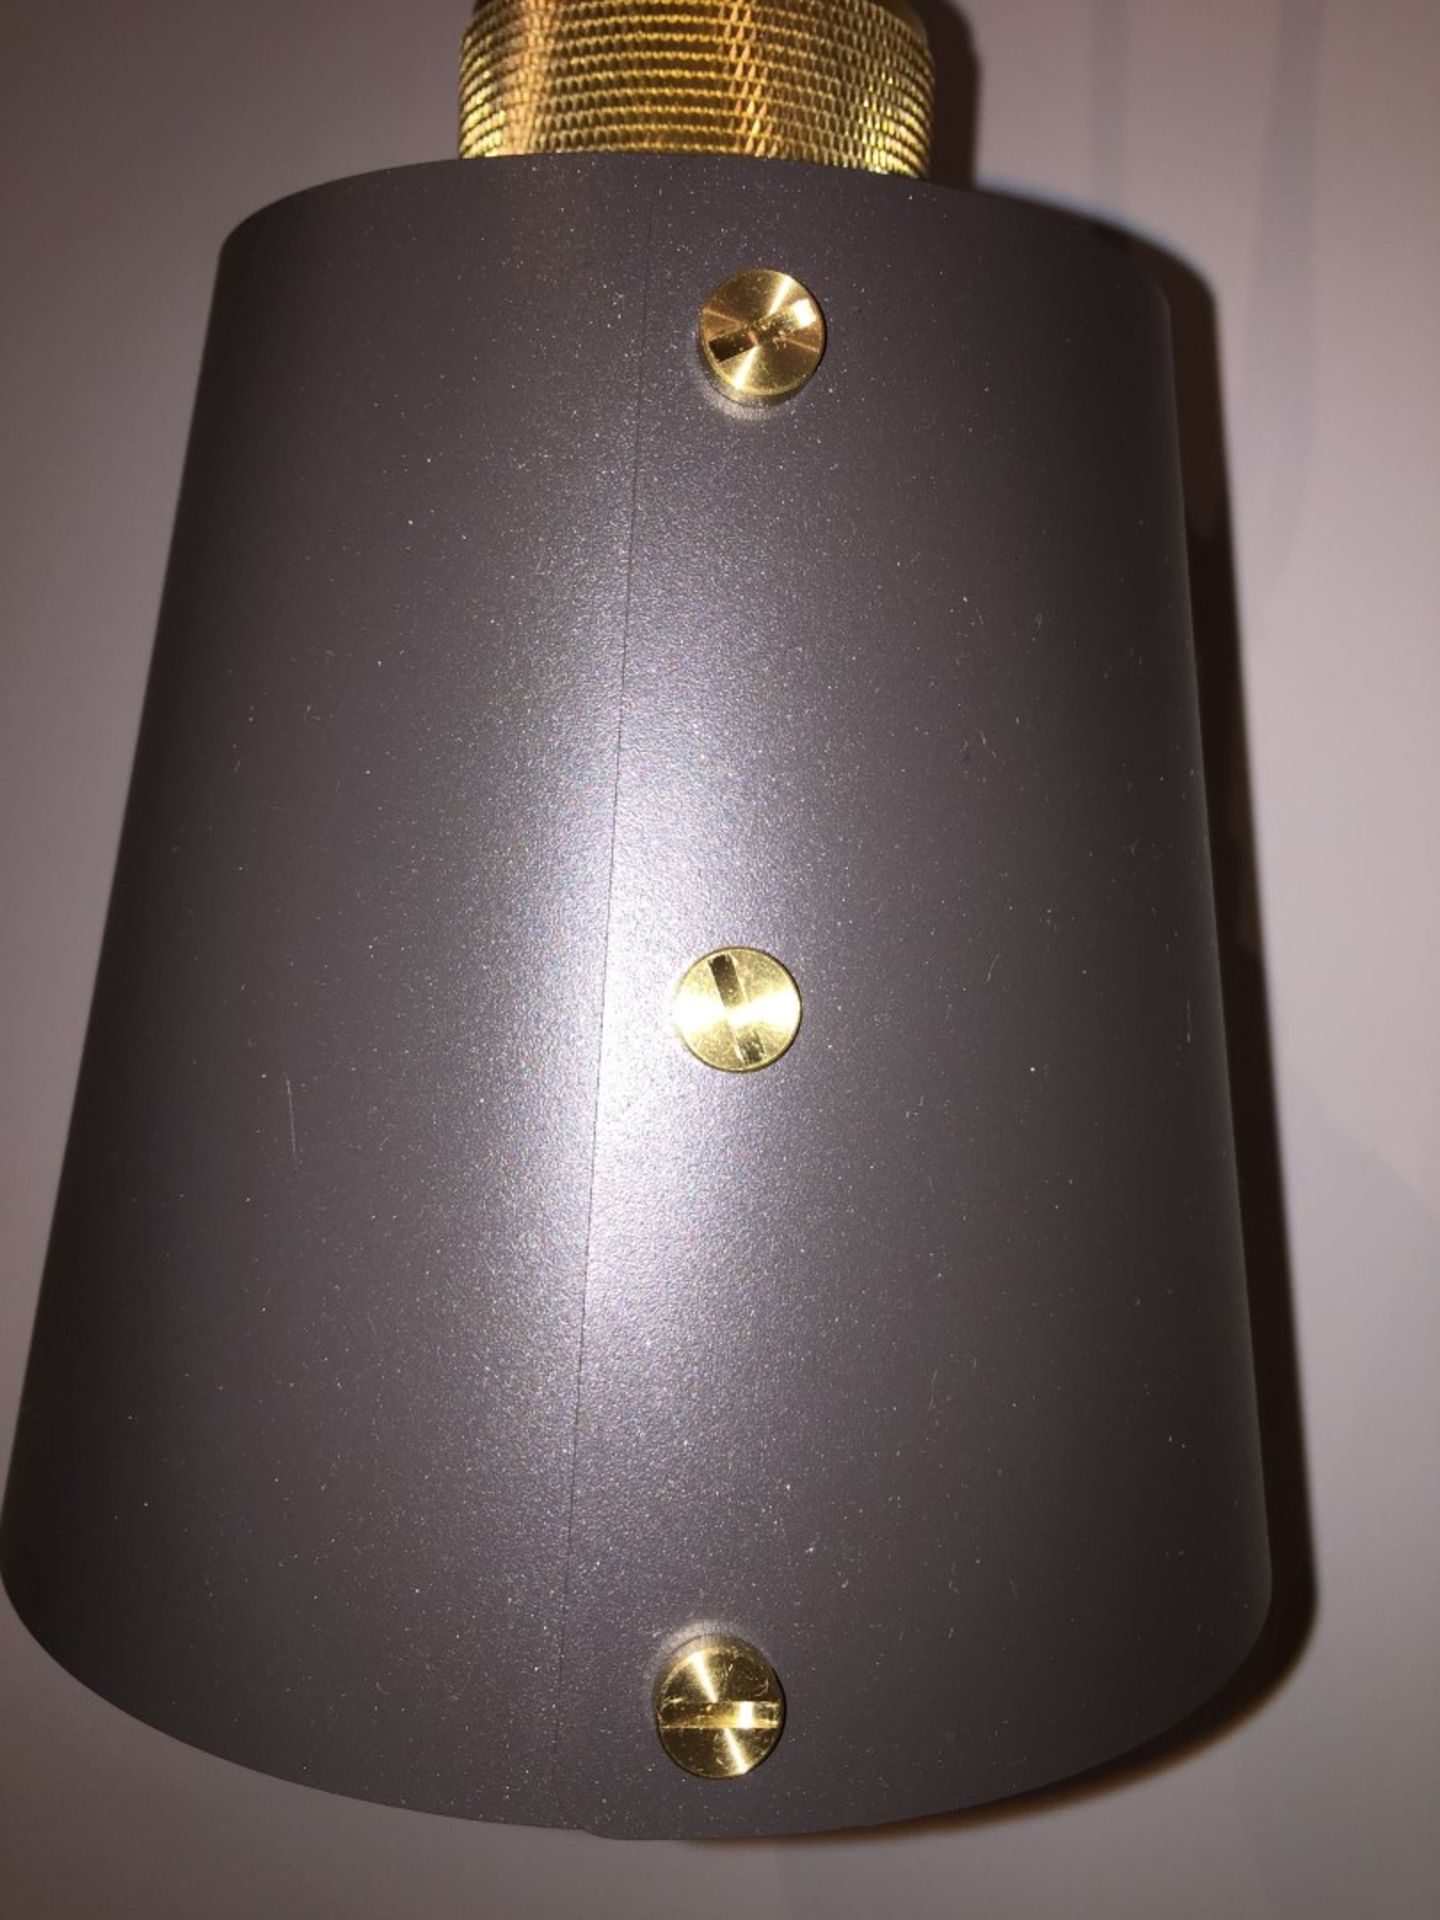 1 x BUSTER + PUNCH Hooked Wall Light With Metal Shade - Ref: WS/FF160I - CL204 - Location: London Ci - Image 8 of 10